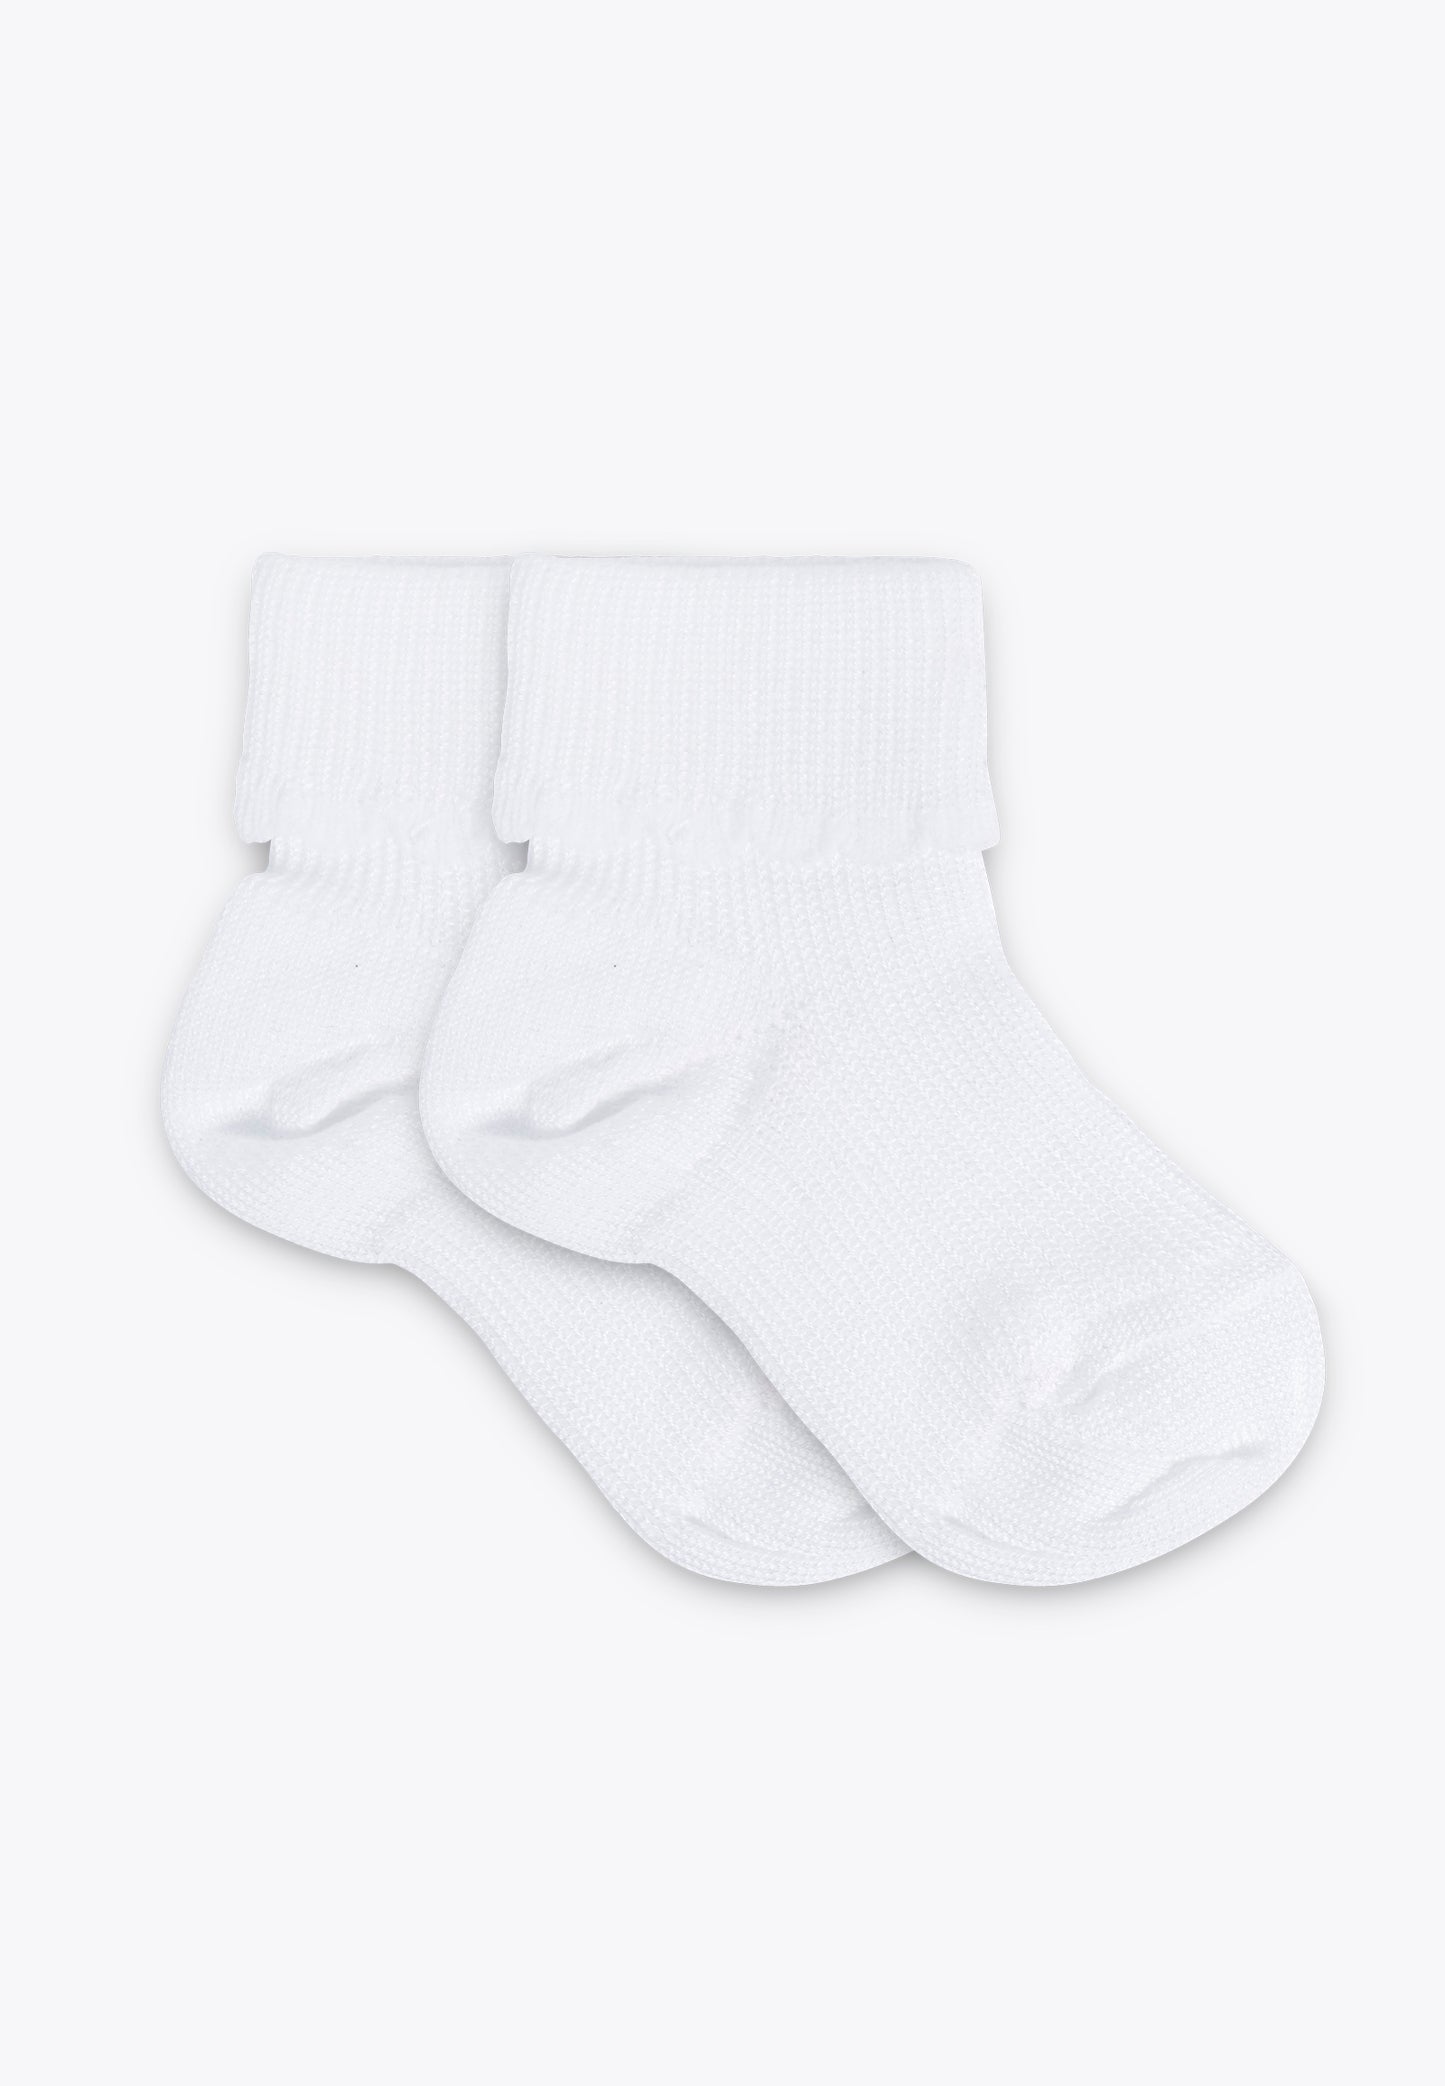 Set of 2 Pairs of First Days Cotton Socks